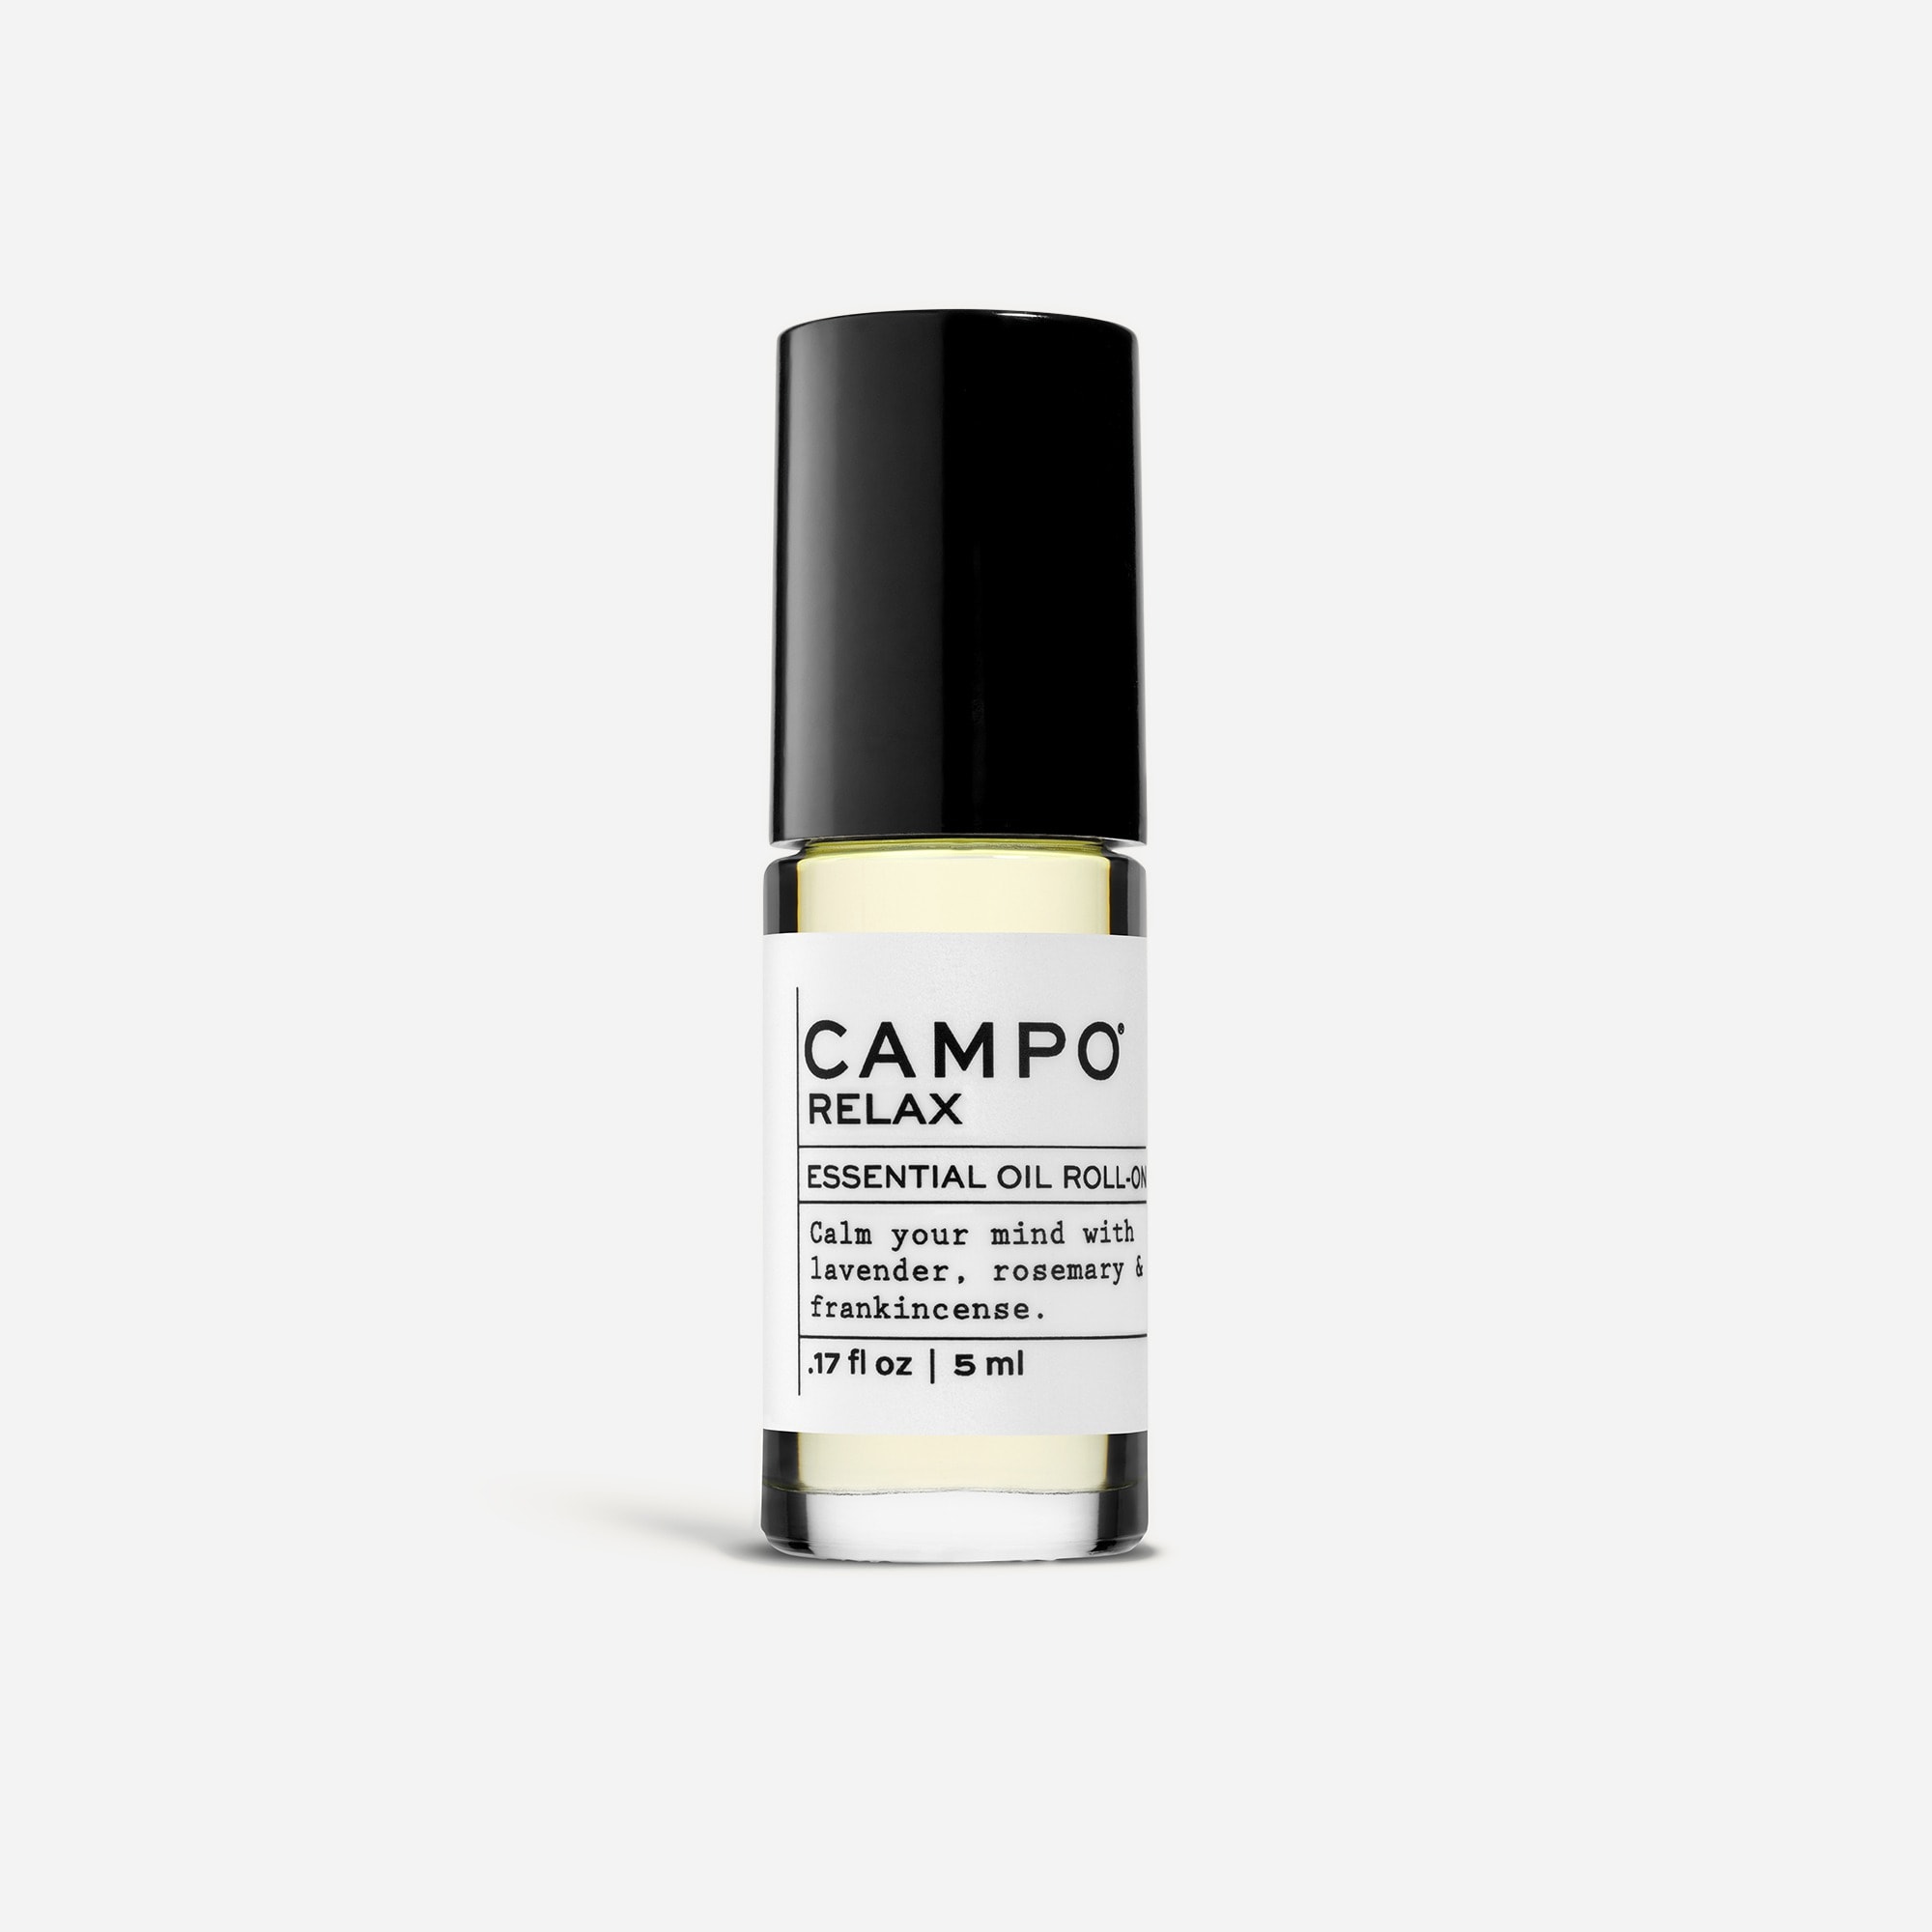 Jcrew CAMPO RELAX roll-on oil